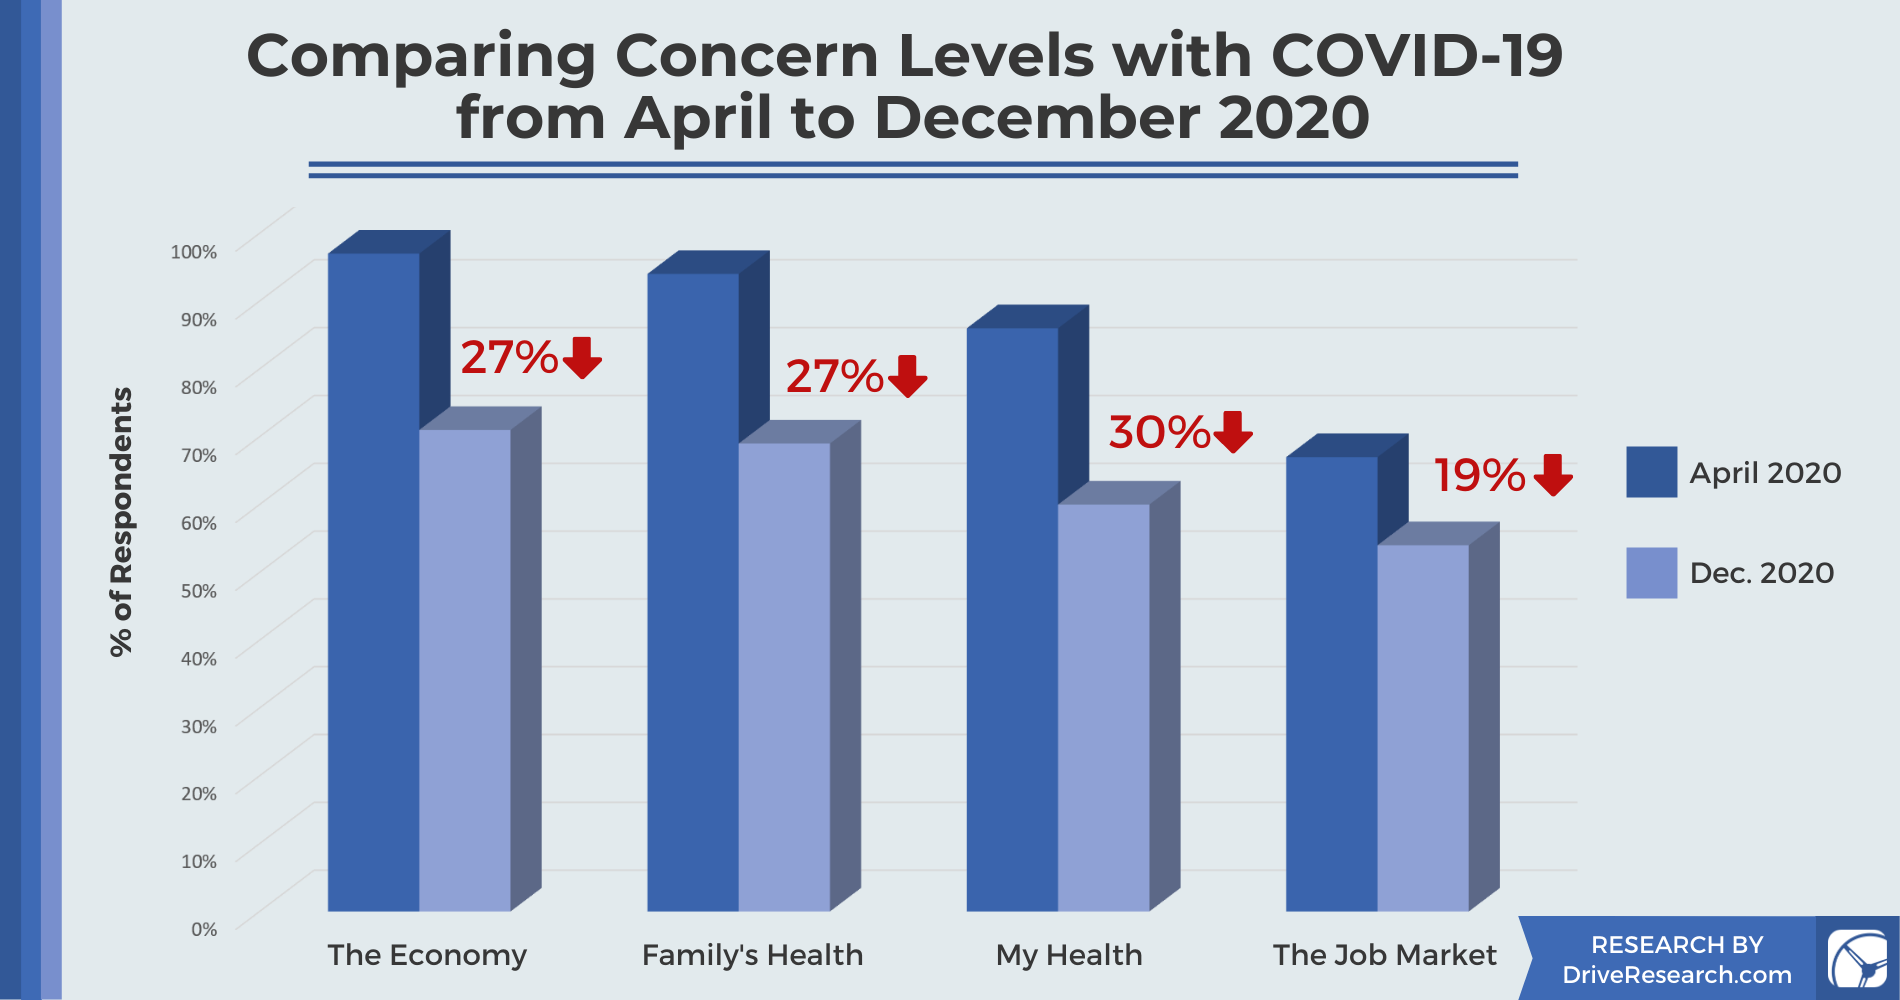 surveys showed that concerns with the economy, family’s health, and people's own health had gone down by 30%